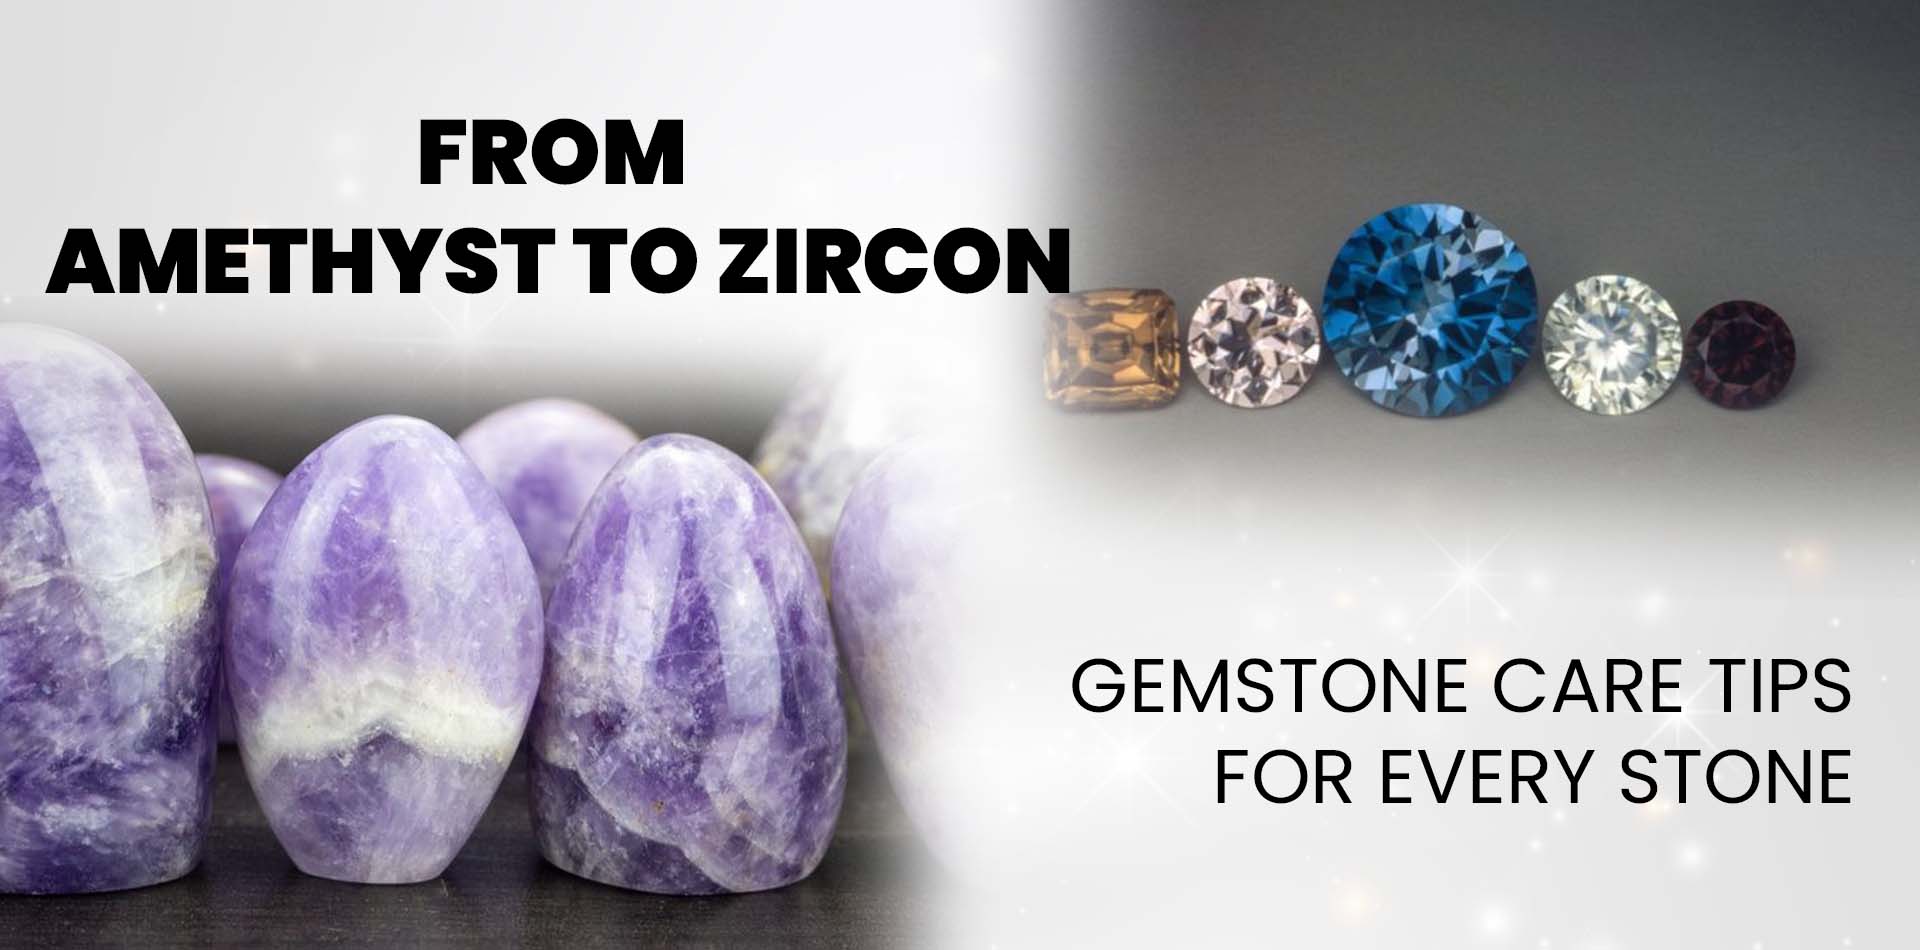 From Amethyst to Zircon: Gemstone Care Tips for Every Stone